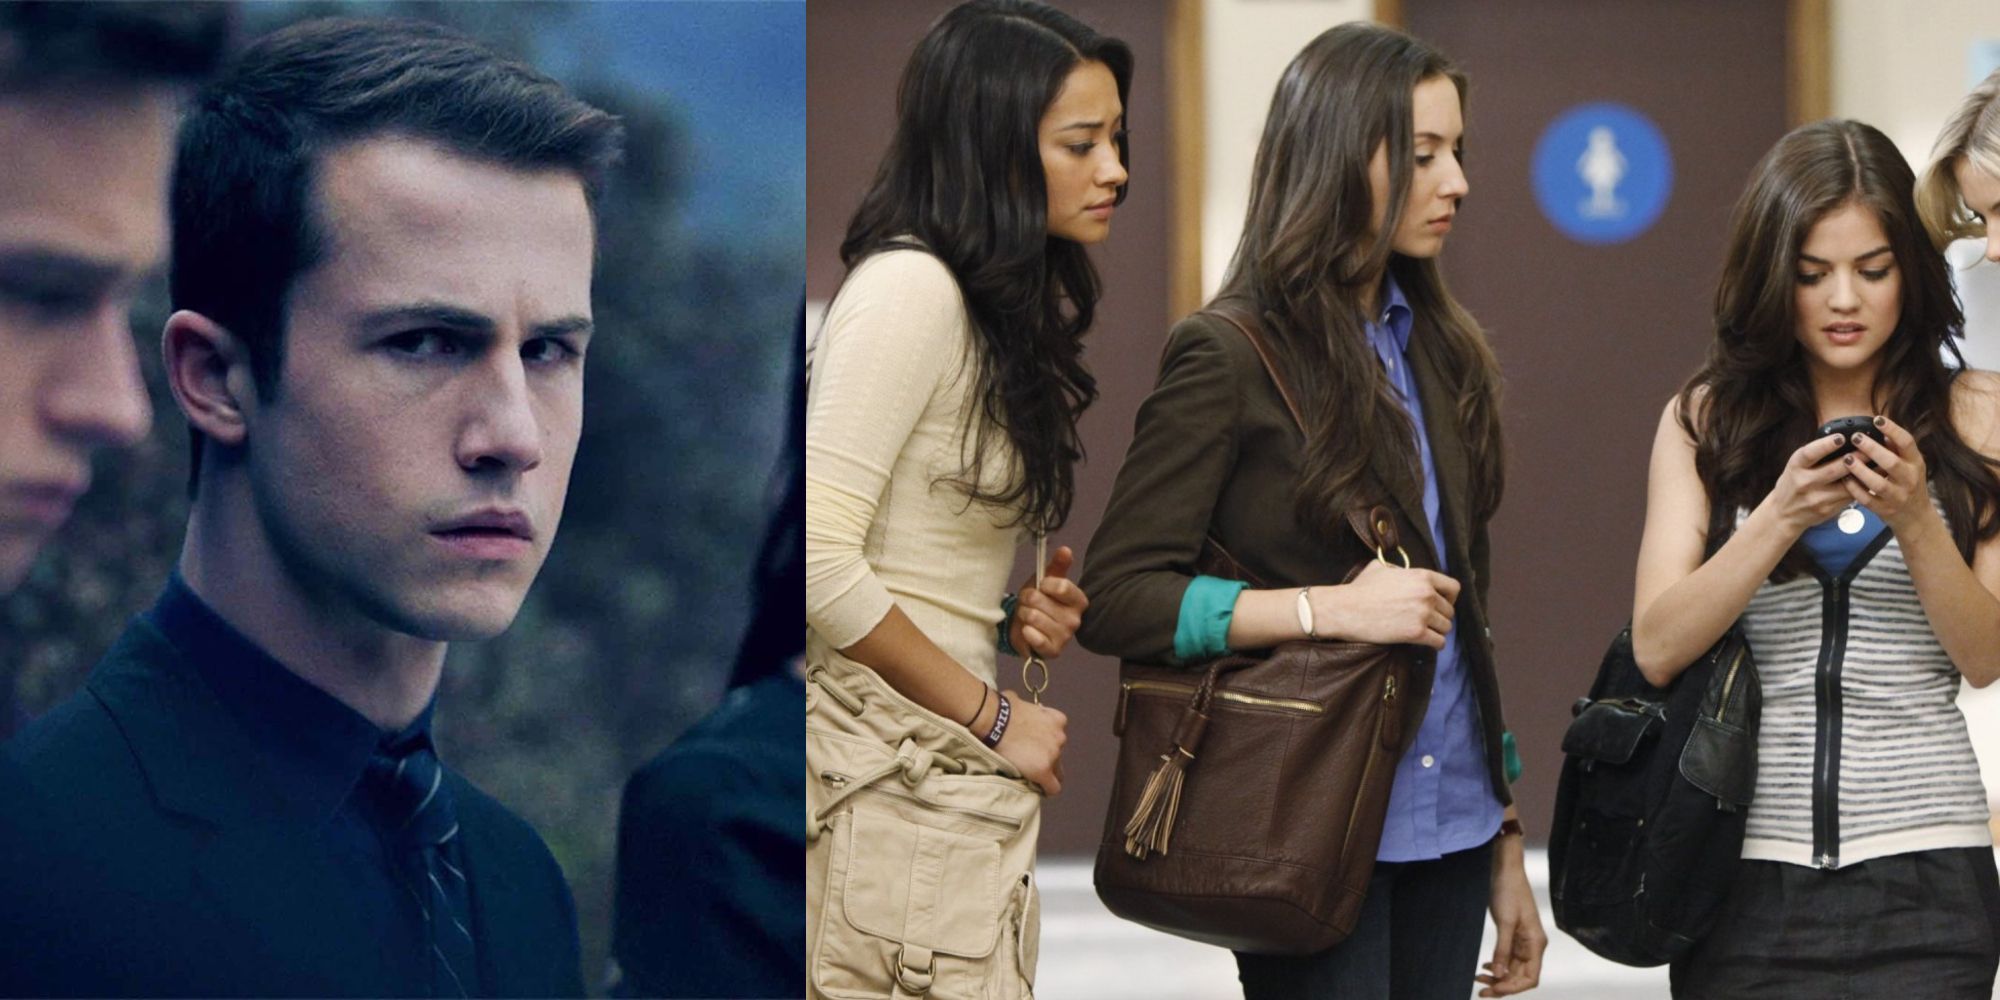 Split images of 13 Reasons Why and Pretty Little Liars